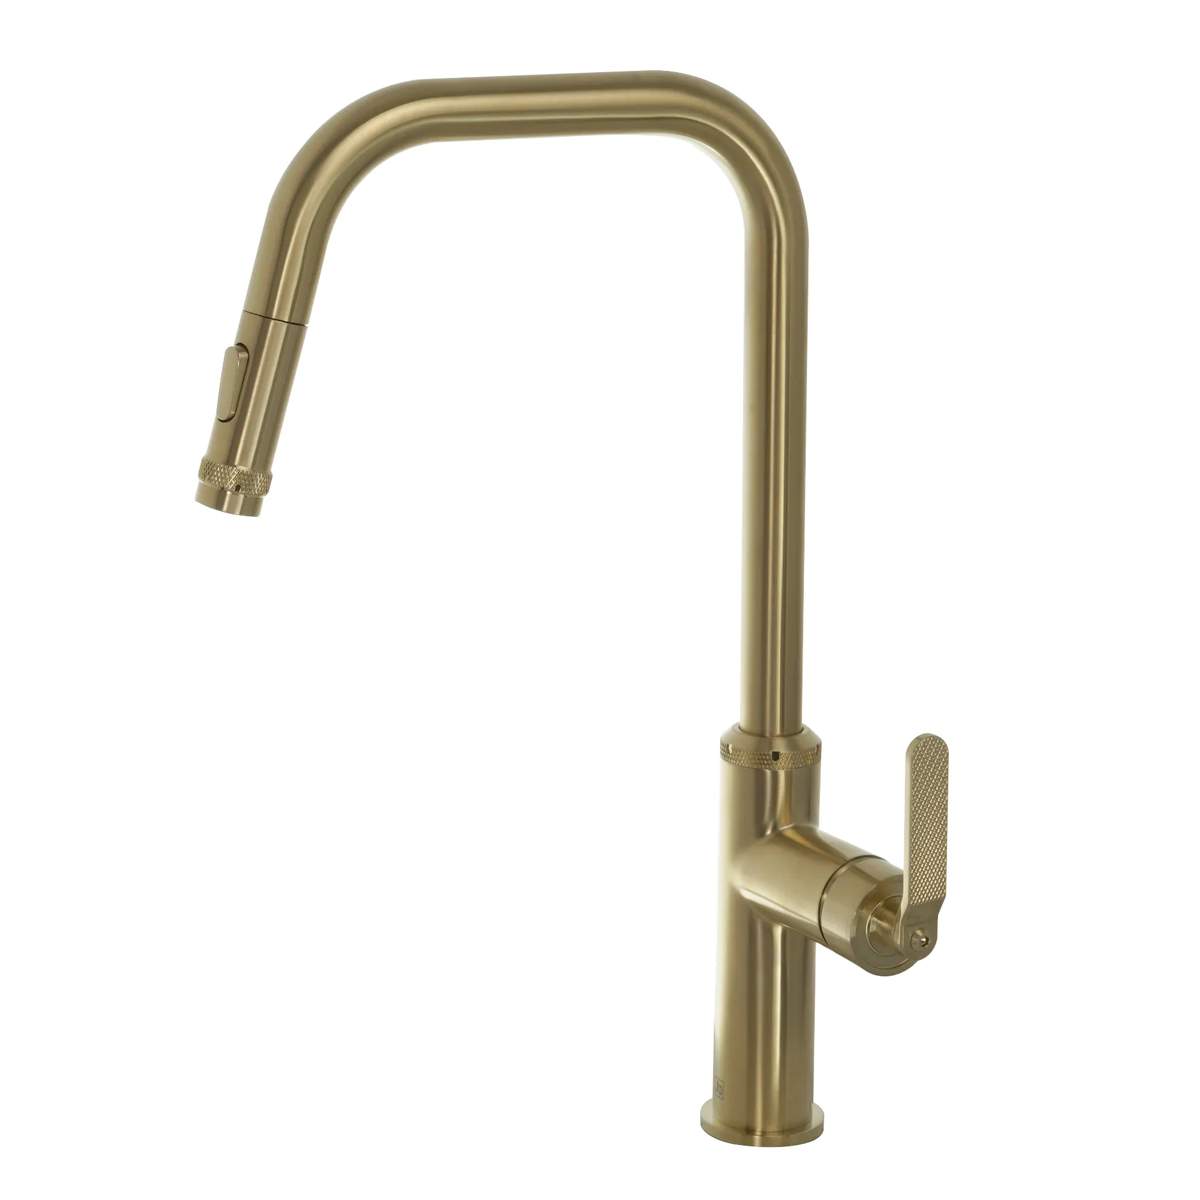 JTP Decor Brushed Brass Single Lever Pull Out Sink Mixer (DEC127BBR)